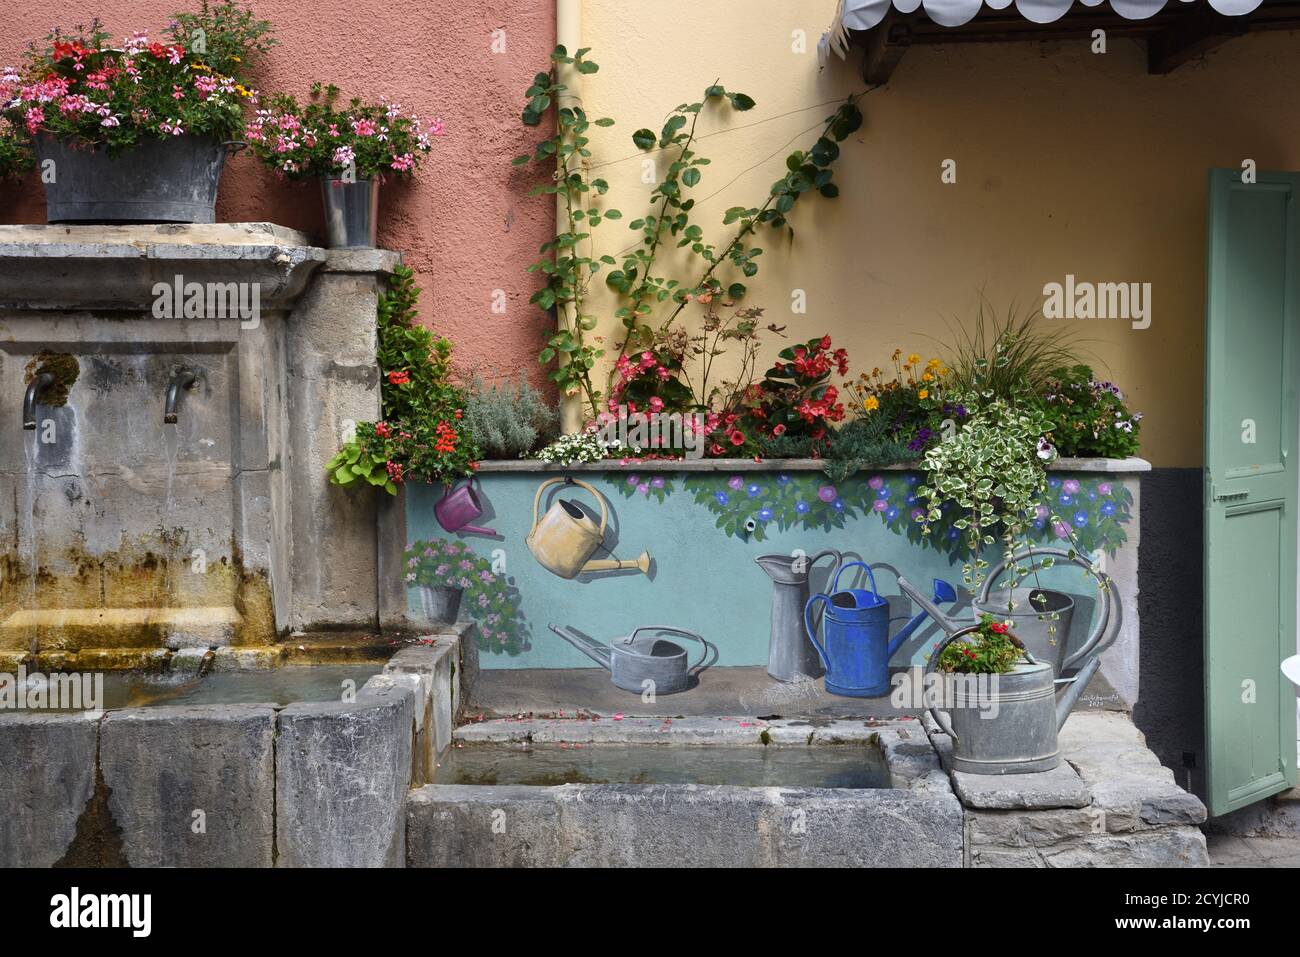 Trompe l'Oeil Decorative or Painted Village Fountain with Antique or Old Metal Watering Cans Colmars-les-Alpes Alpes-de-Haute-Provence Provence France Stock Photo